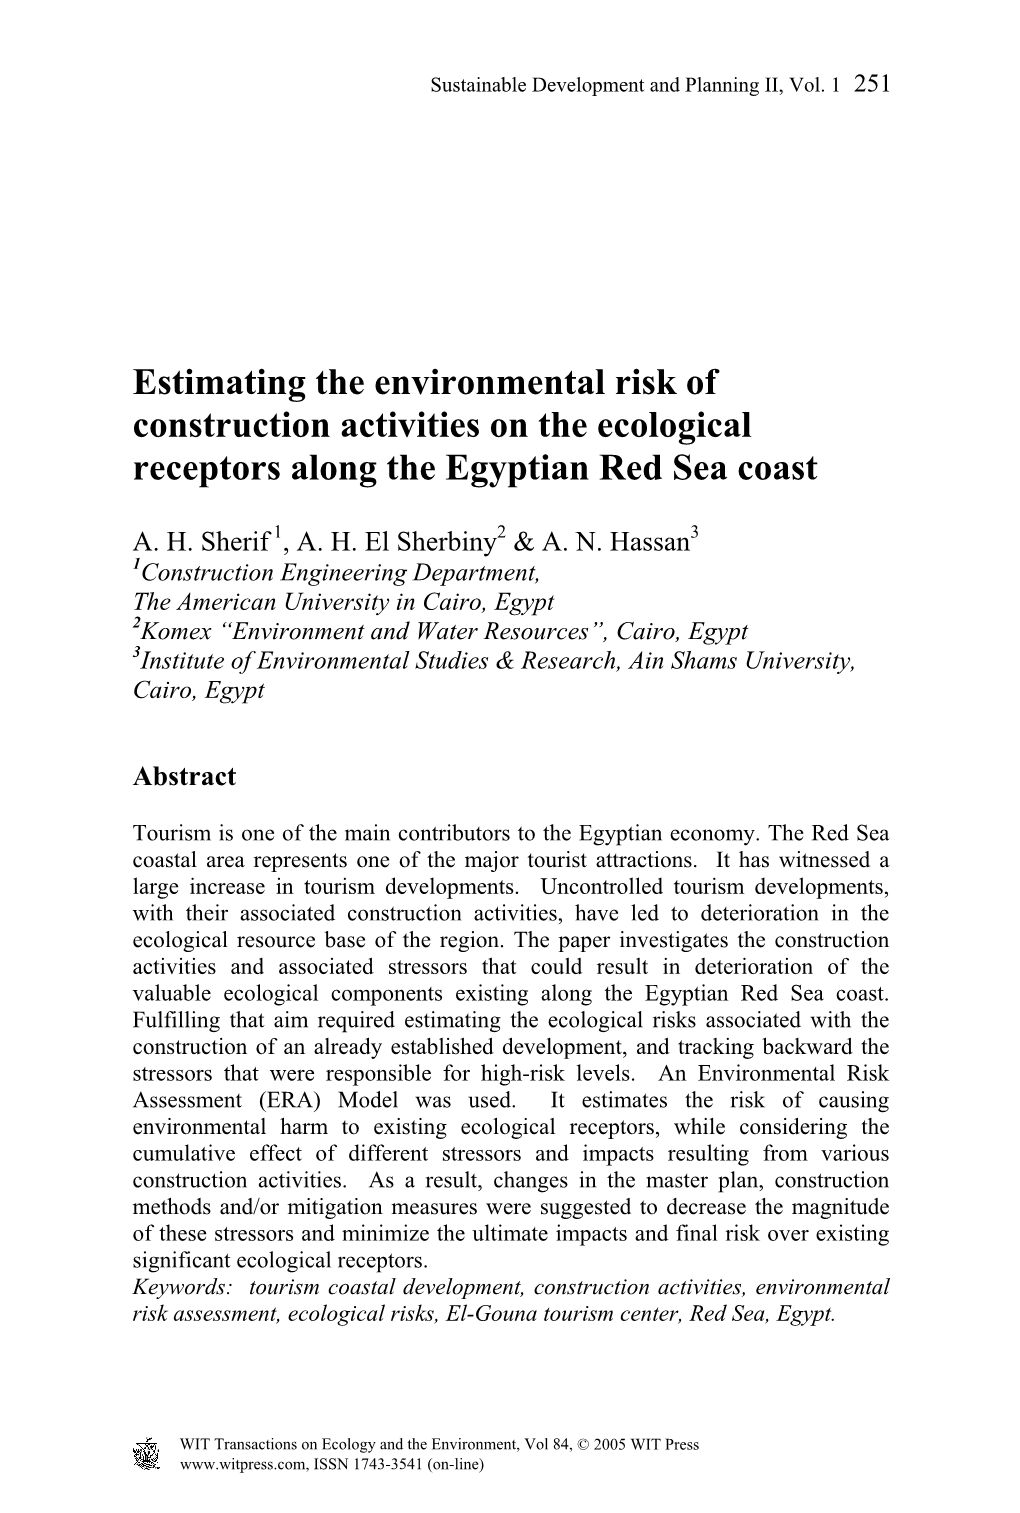 Estimating the Environmental Risk of Construction Activities on the Ecological Receptors Along the Egyptian Red Sea Coast